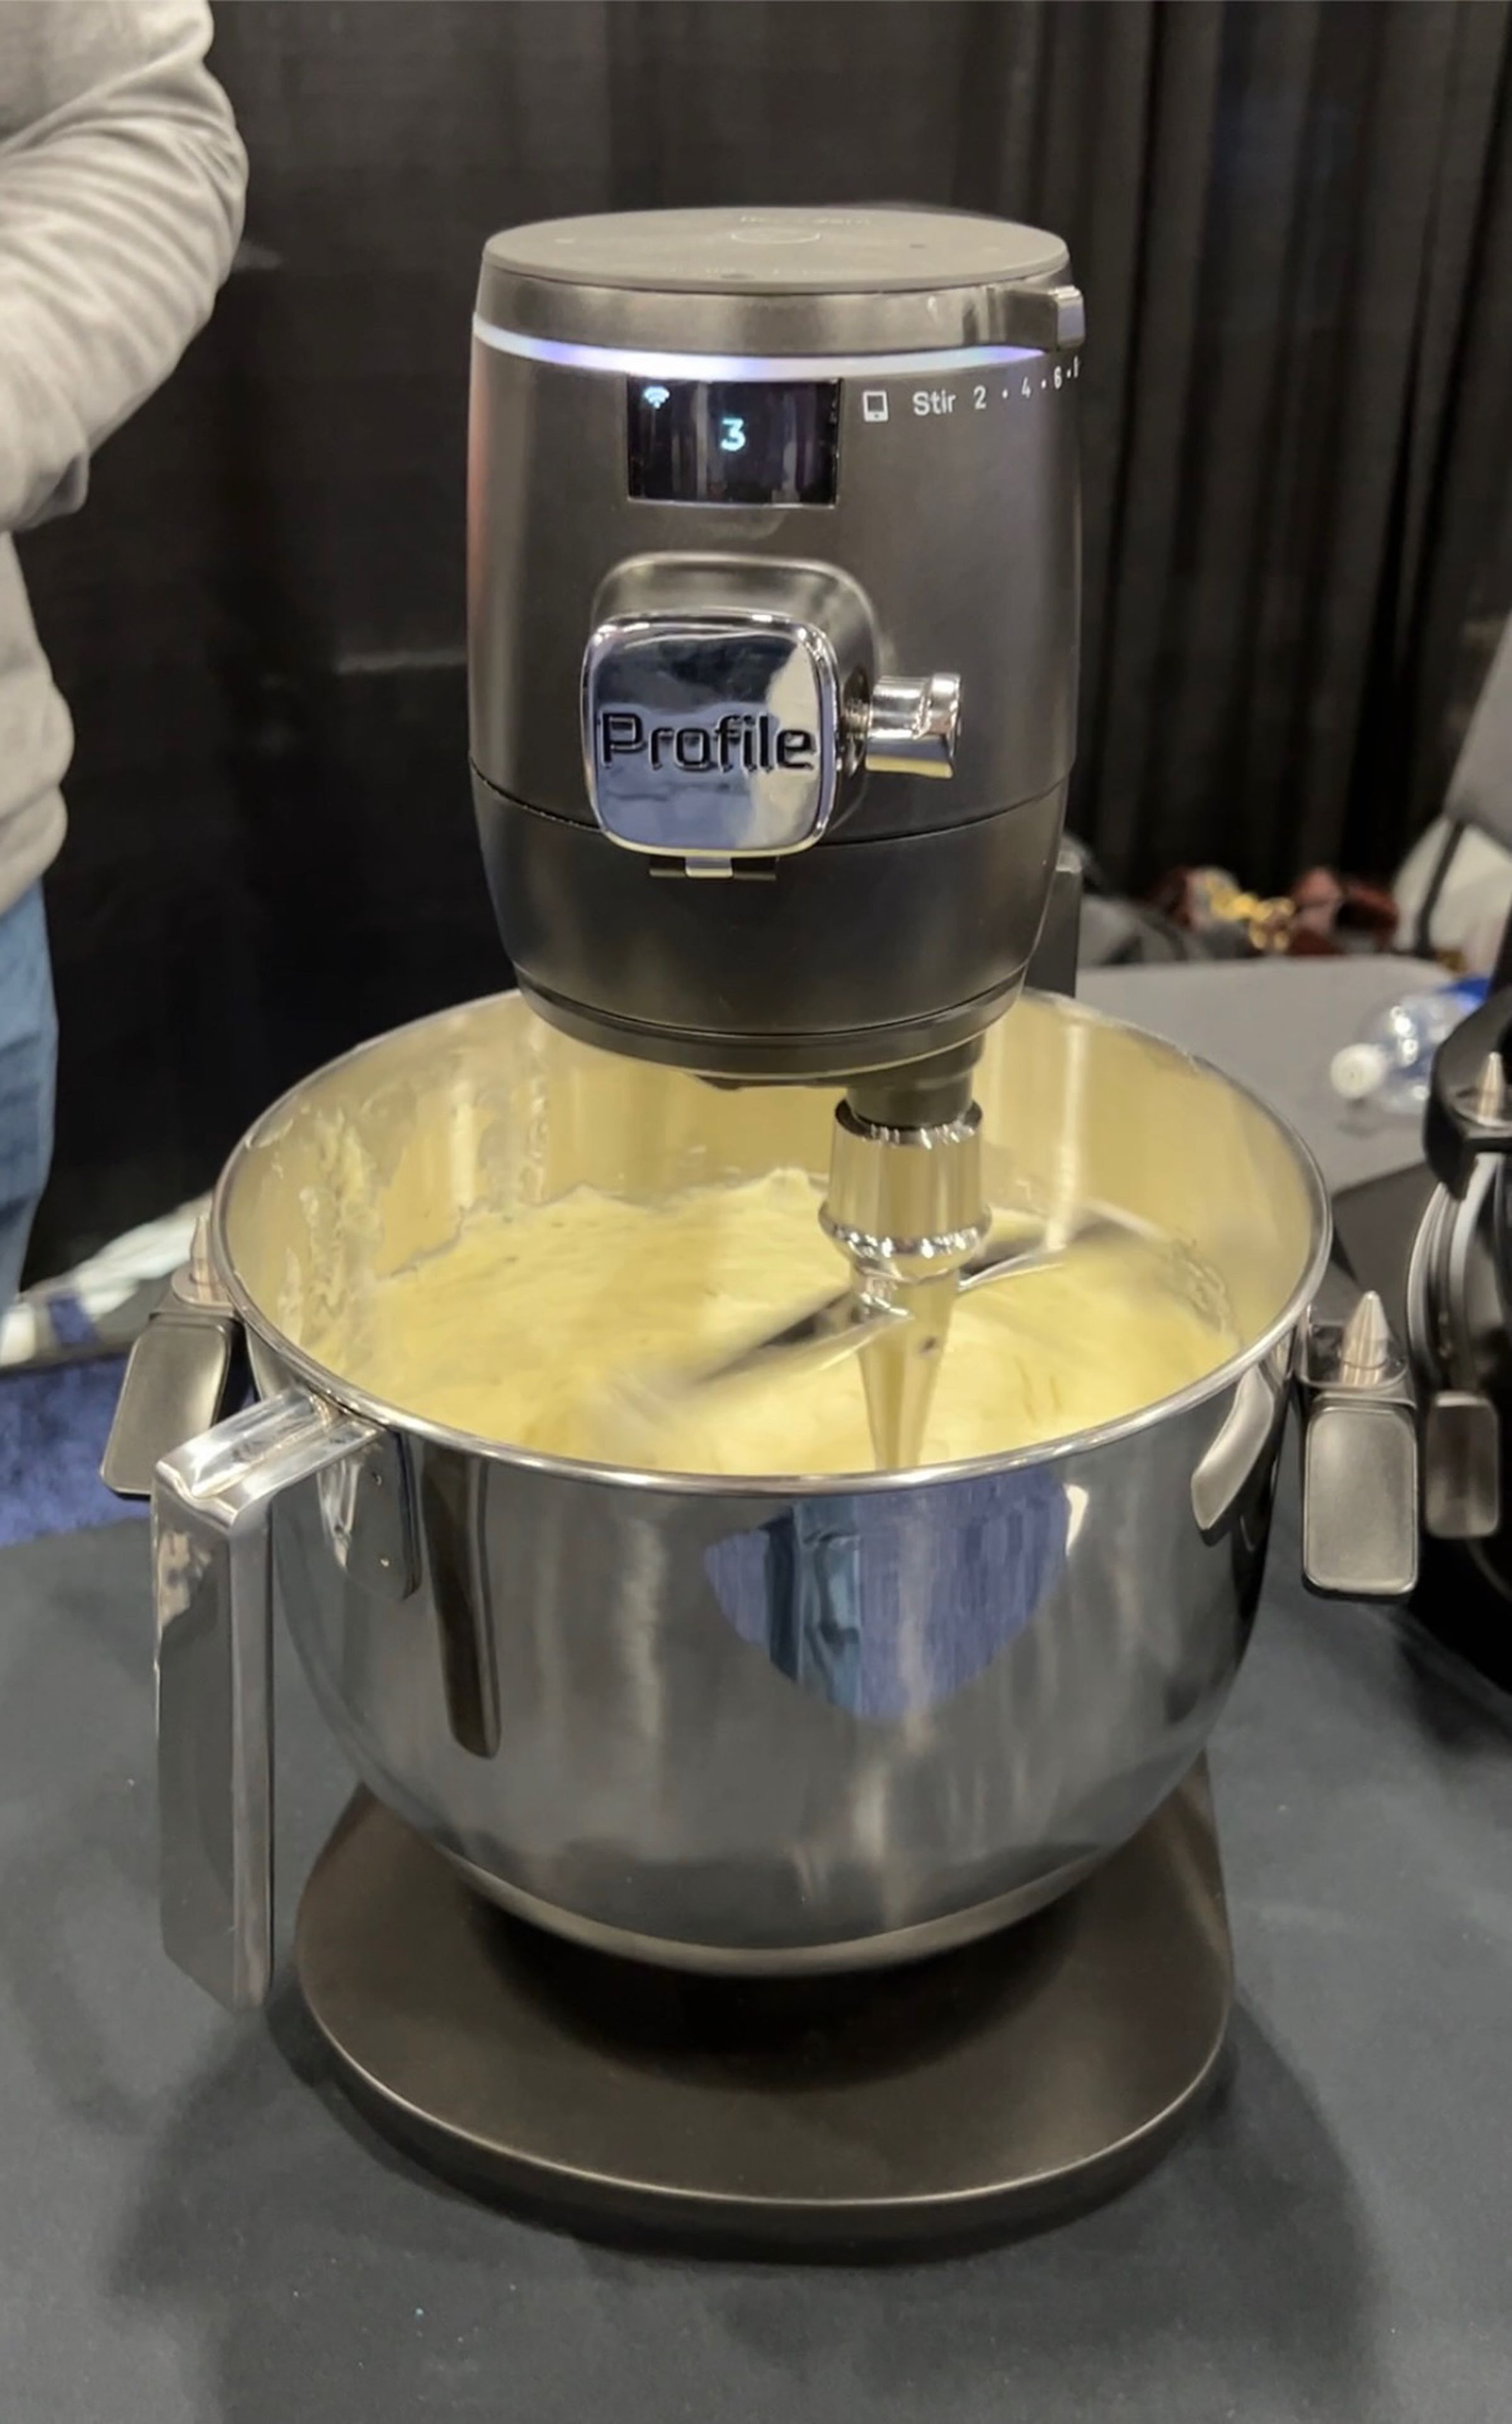 The first smart mixer, the GE Profile Mixer costs $999.99.